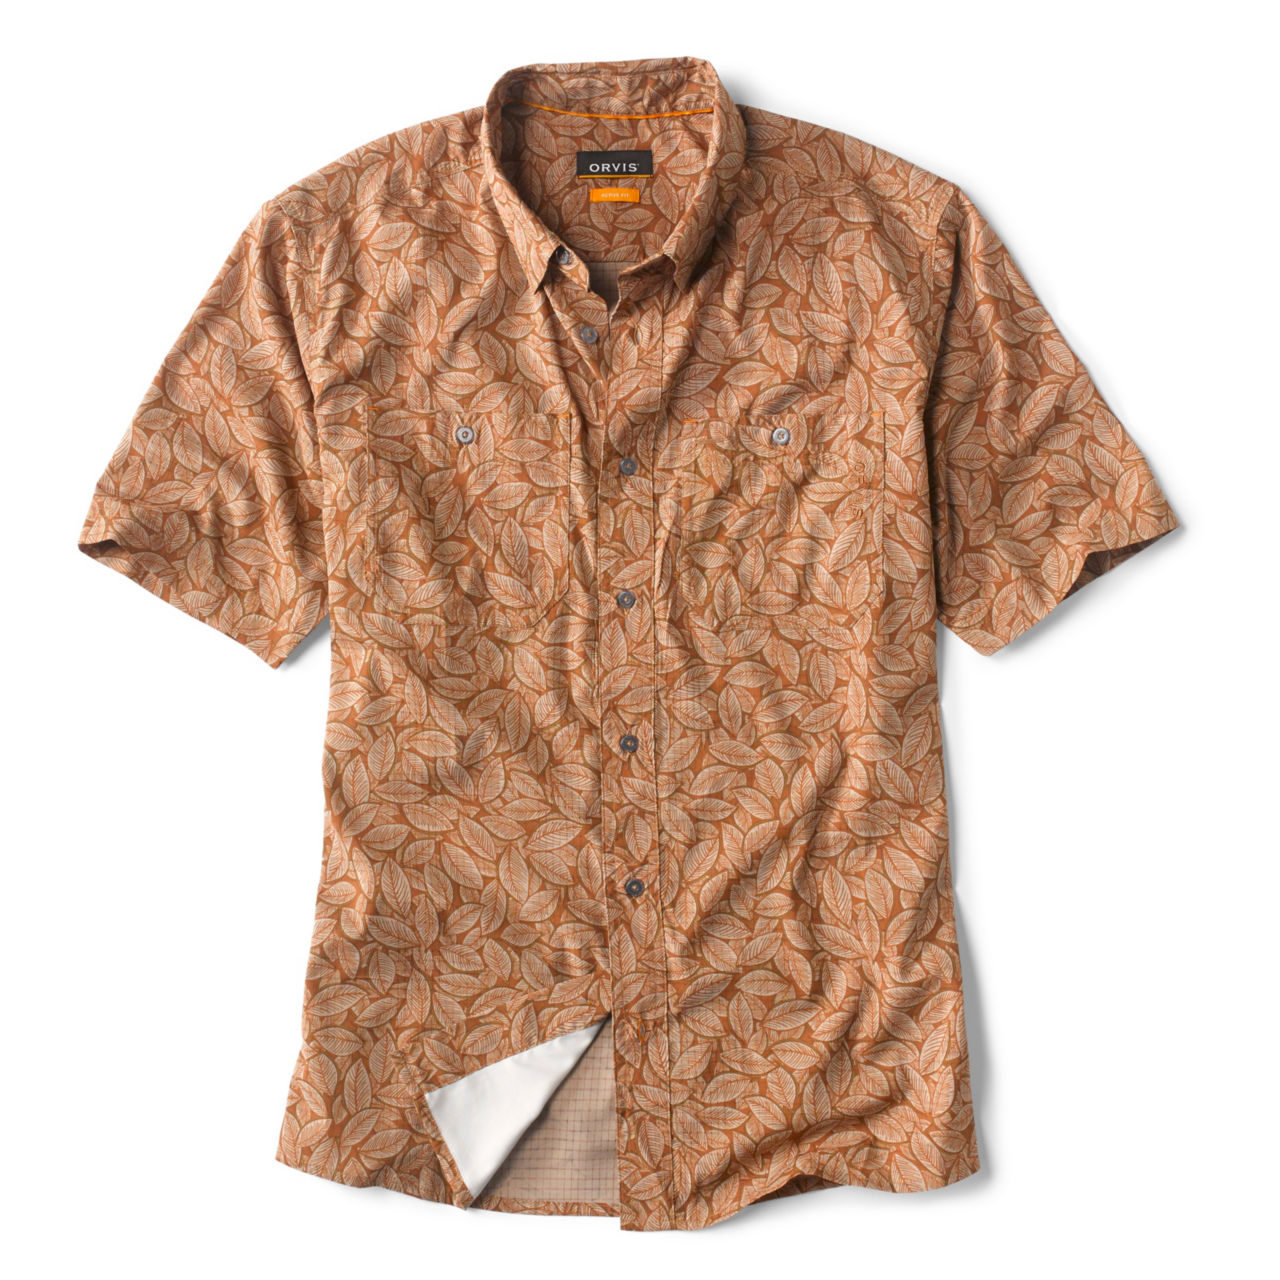 Tropic Tech Printed Short-Sleeved Shirt -  image number 0